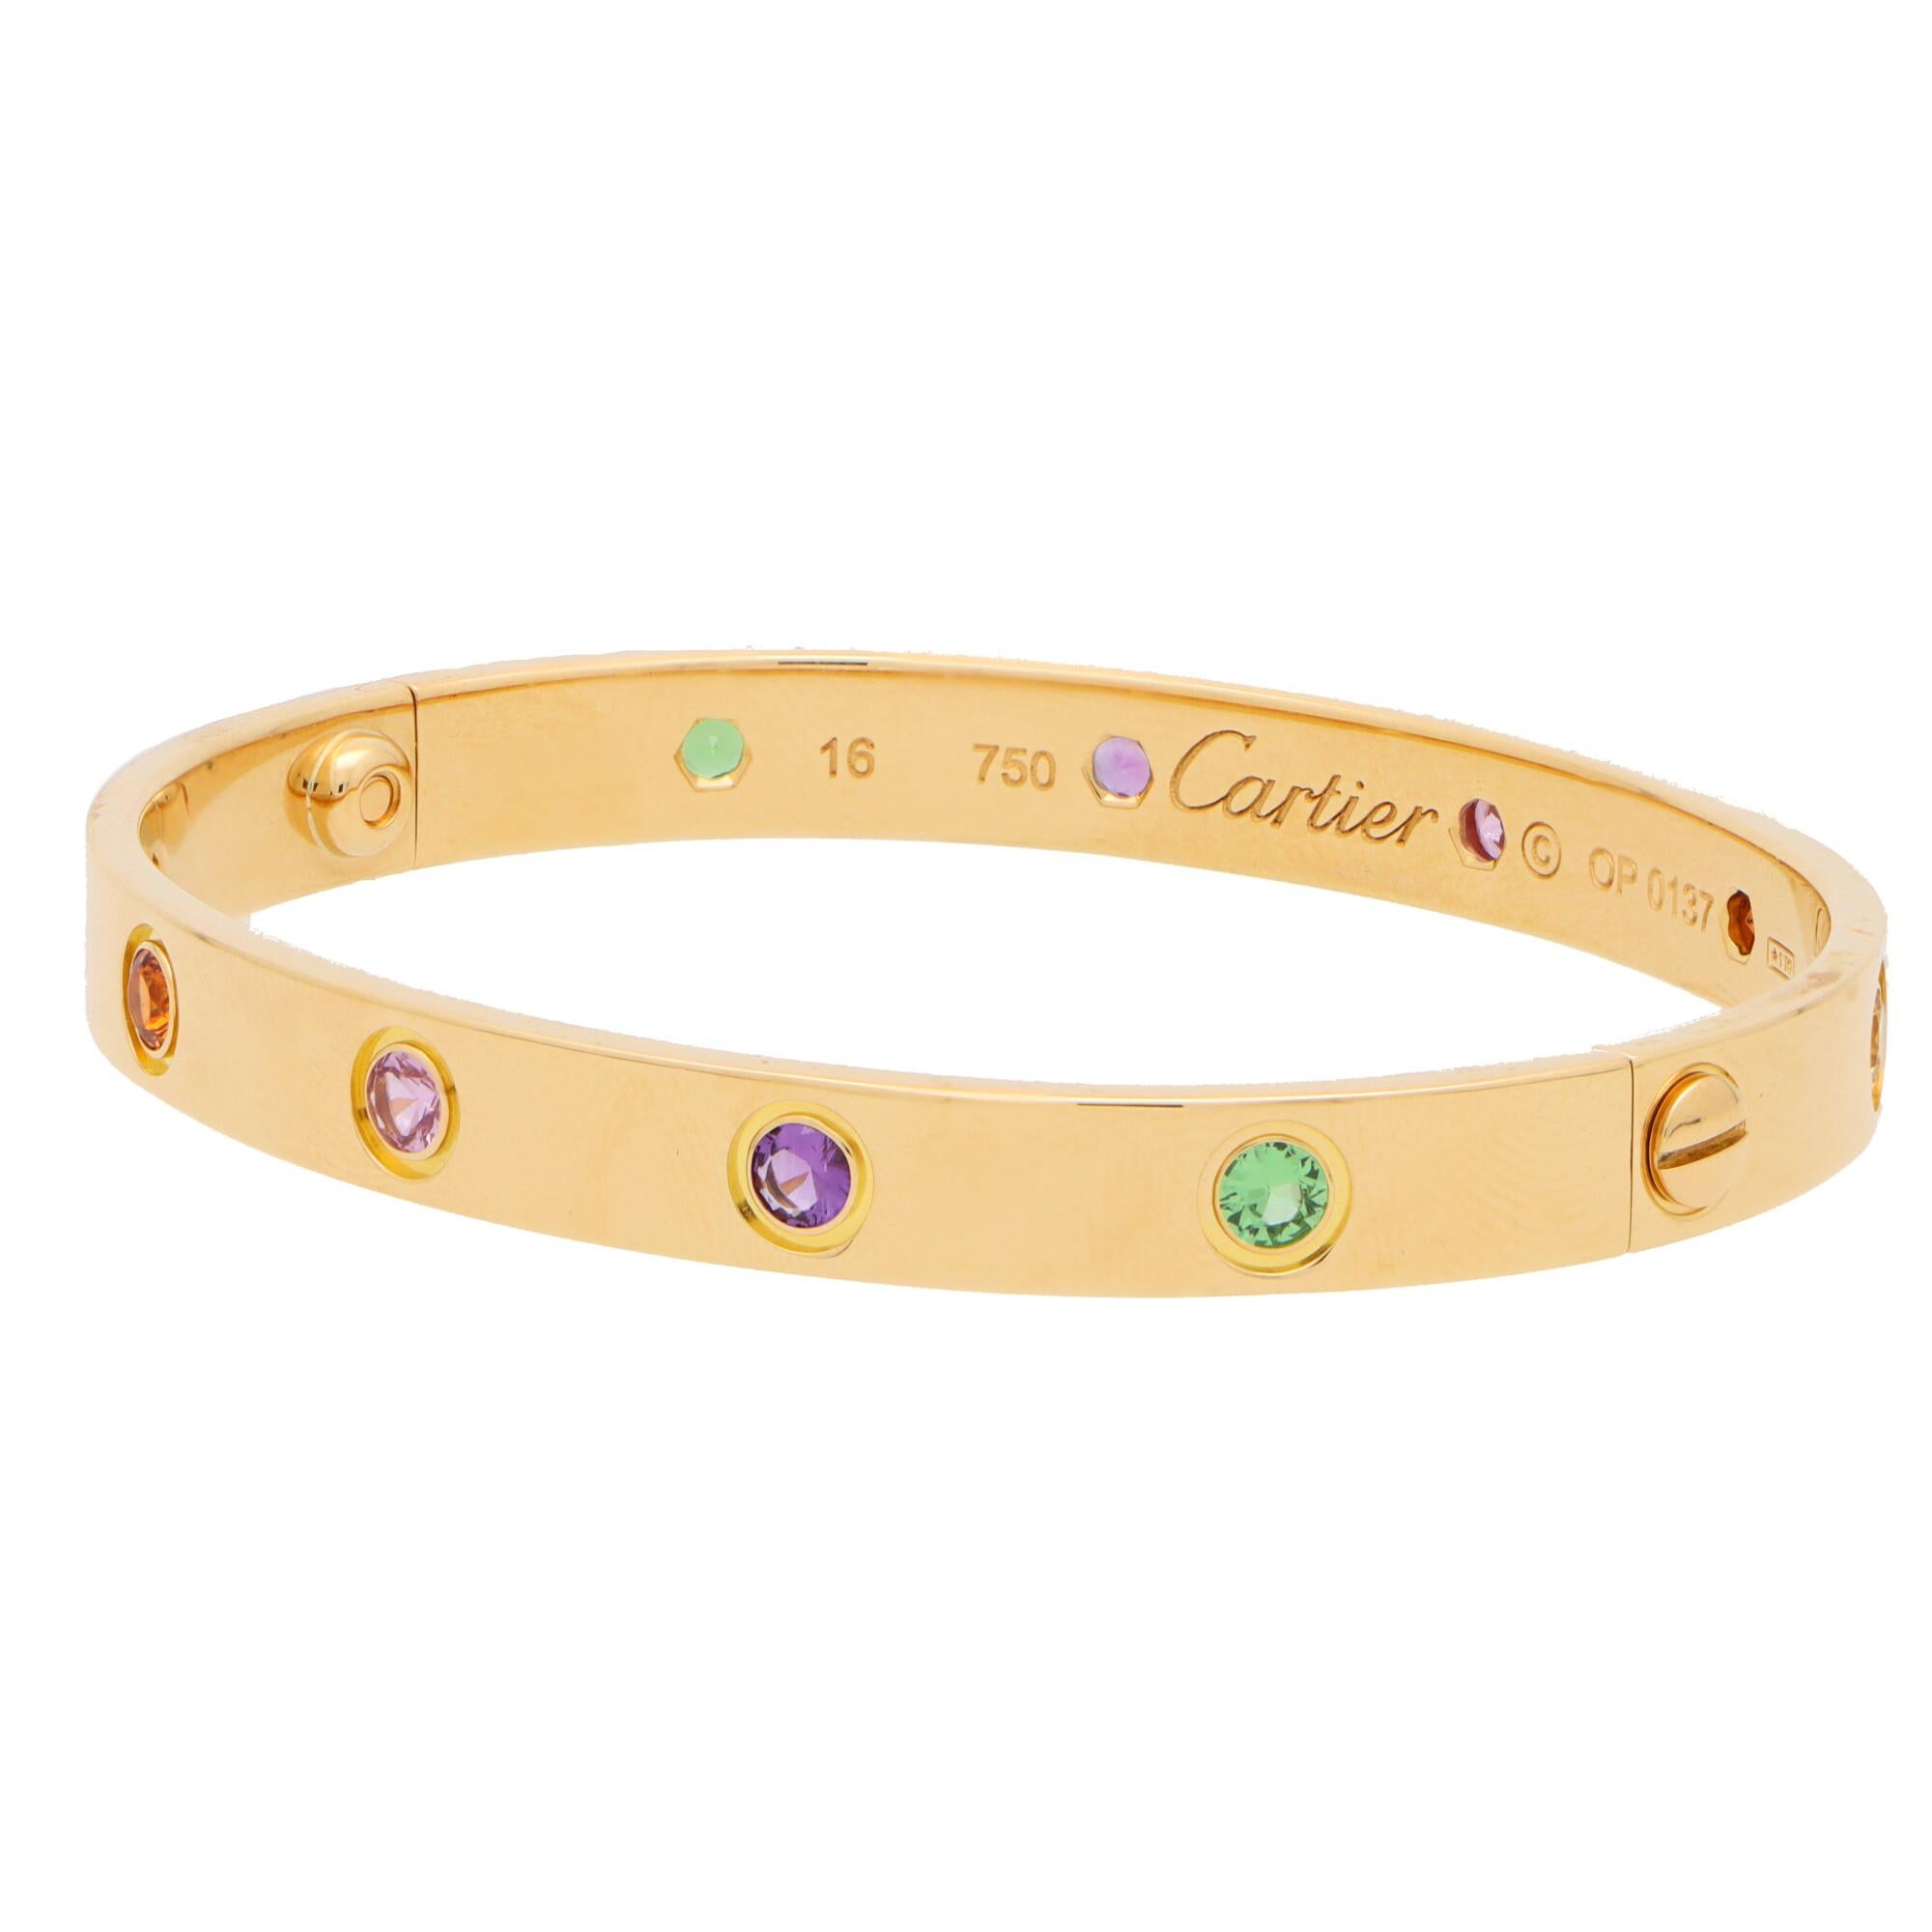 A classic vintage Cartier gem set Love bangle set in 18k yellow gold.

The Love collection is a firm favorite of many mainly due to the simple, beautiful and elegant design. The bangle is composed of a 6-millimetre band with ten individual stones